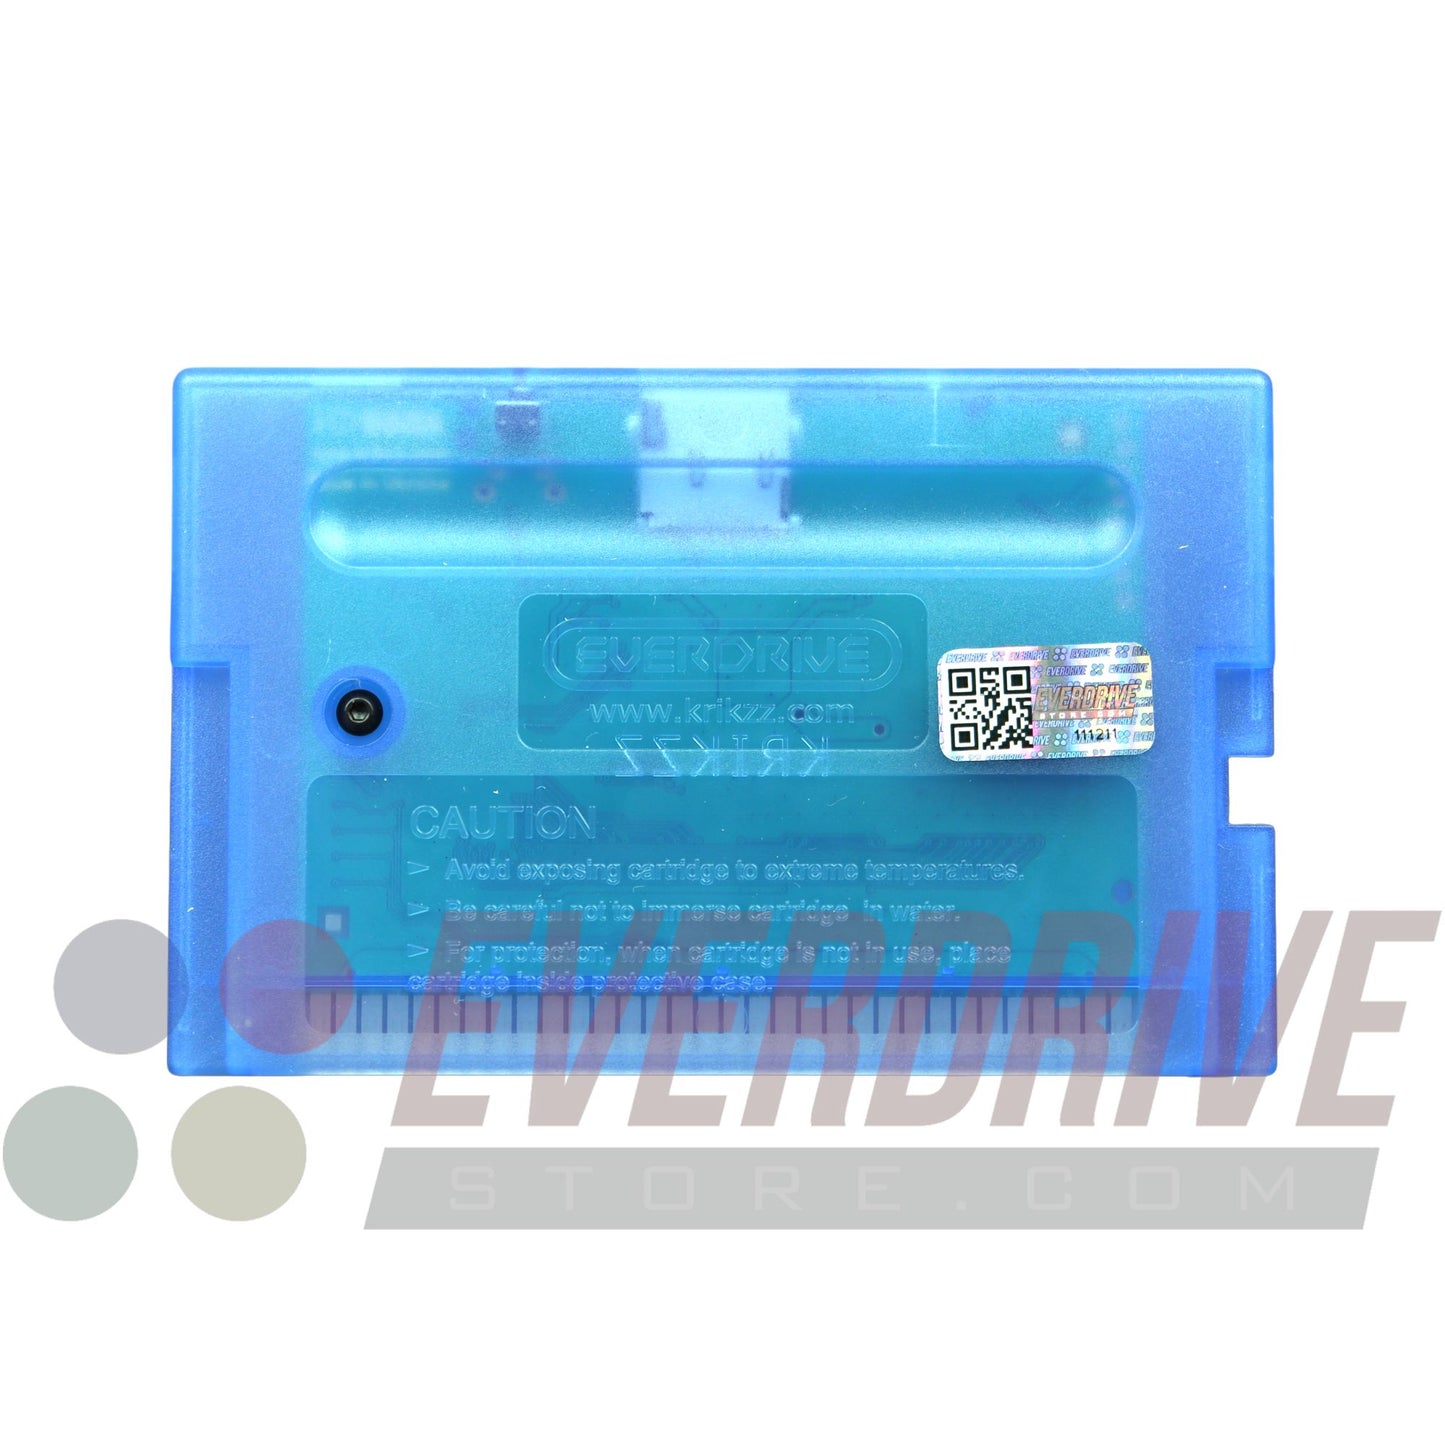 Mega Everdrive X5 - Frosted Blue